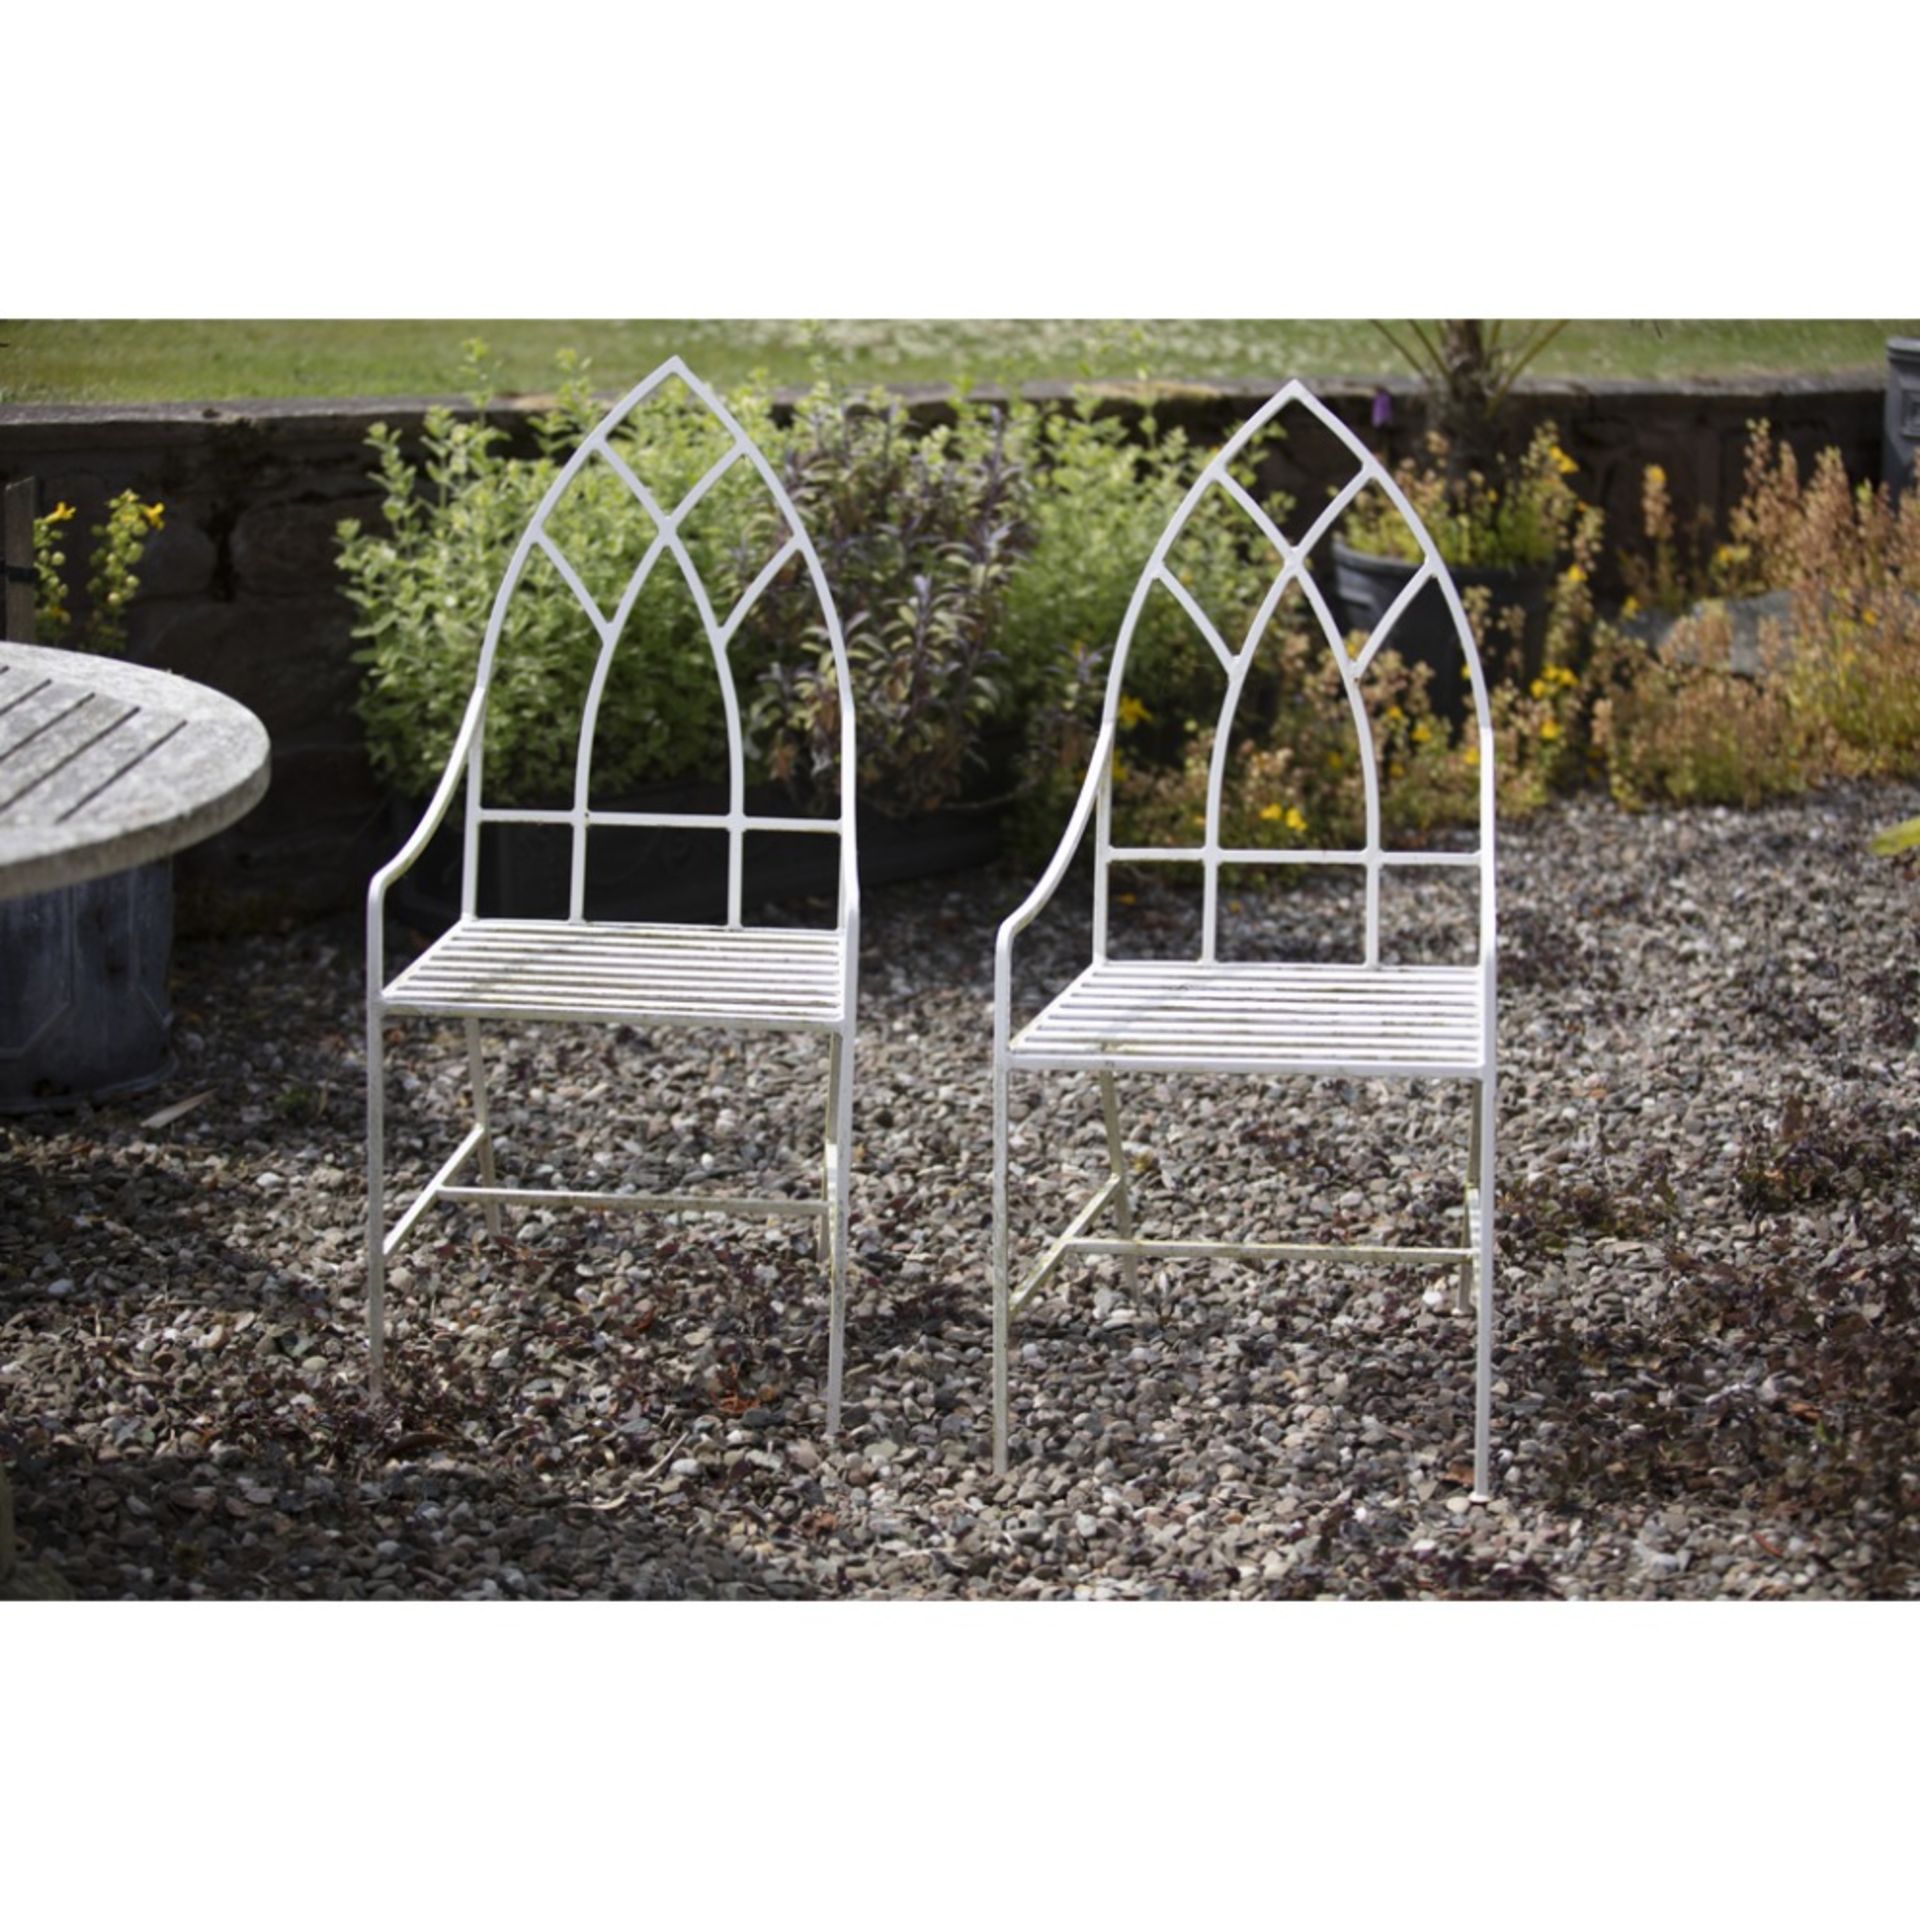 PAIR OF WHITE PAINTED WROUGHT IRON GARDEN CHAIRS MODERN with lancet arch backs above open arms and